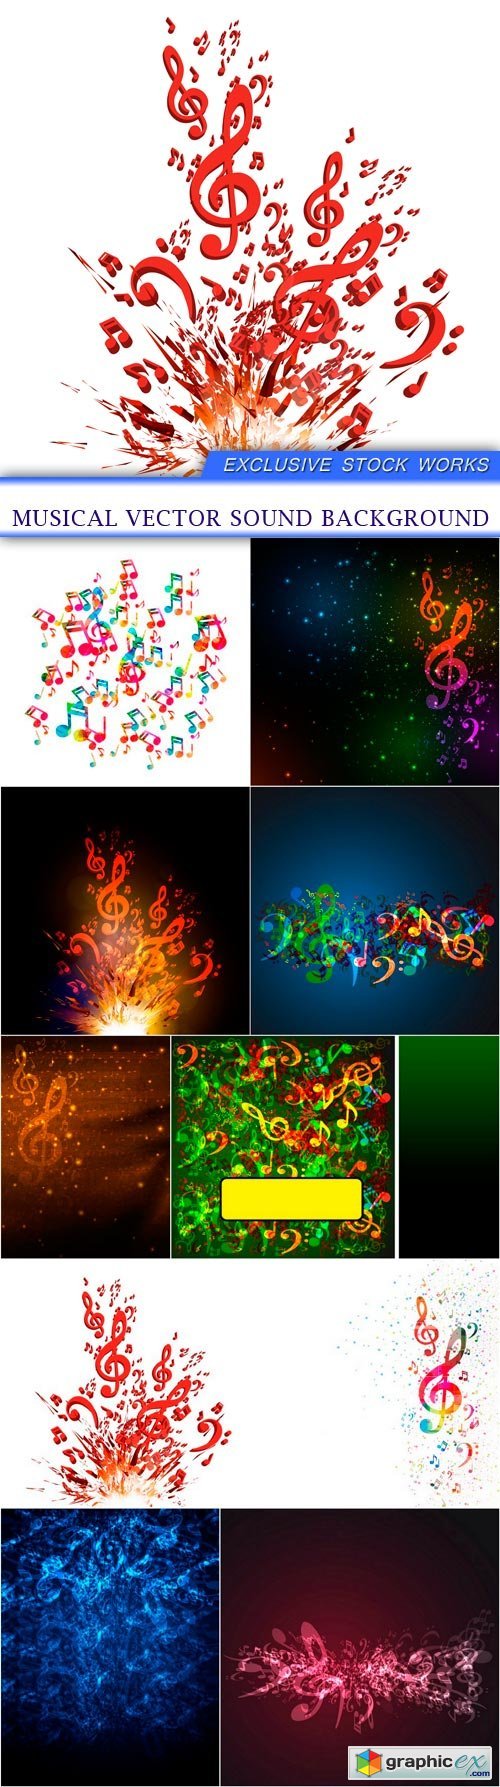 Musical vector sound background